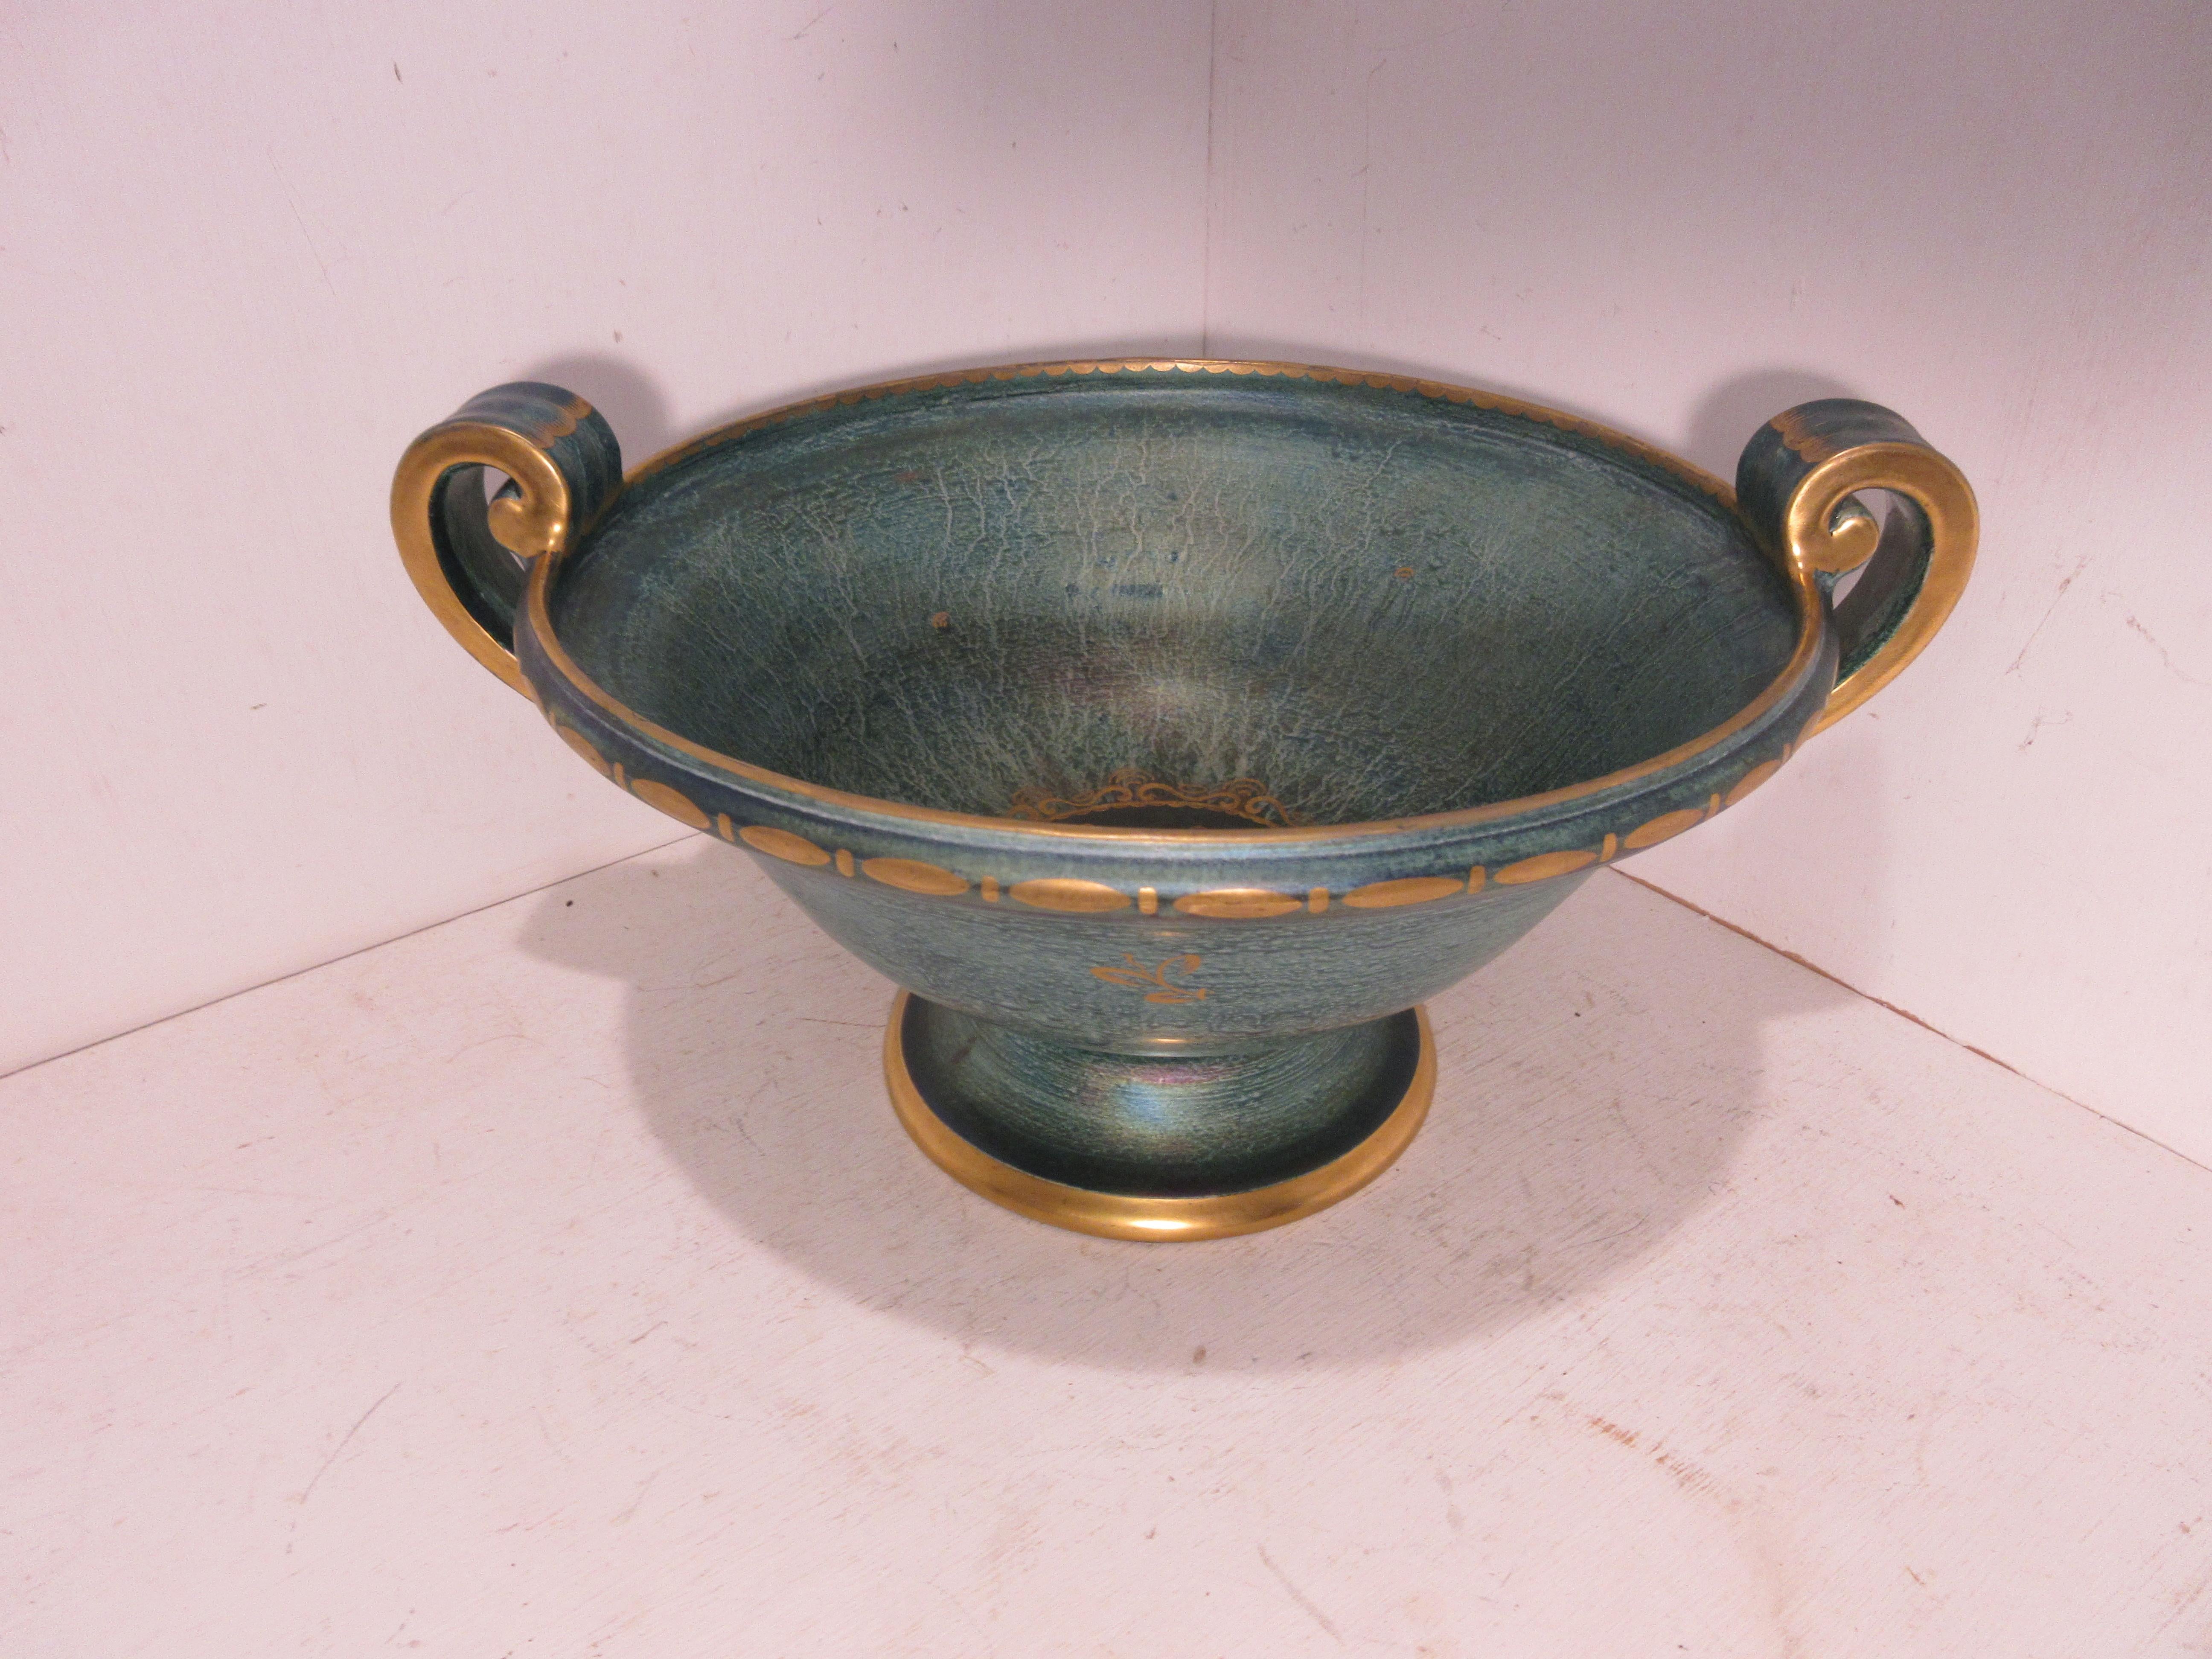 This is a handmade rare Swedish Art Deco ceramic bowl in green and gold luster glaze hand decorated with gold made by the Swedish ceramic artist Josef Ekberg. He was one of Sweden’s top ceramic artist at the time. He started working at the